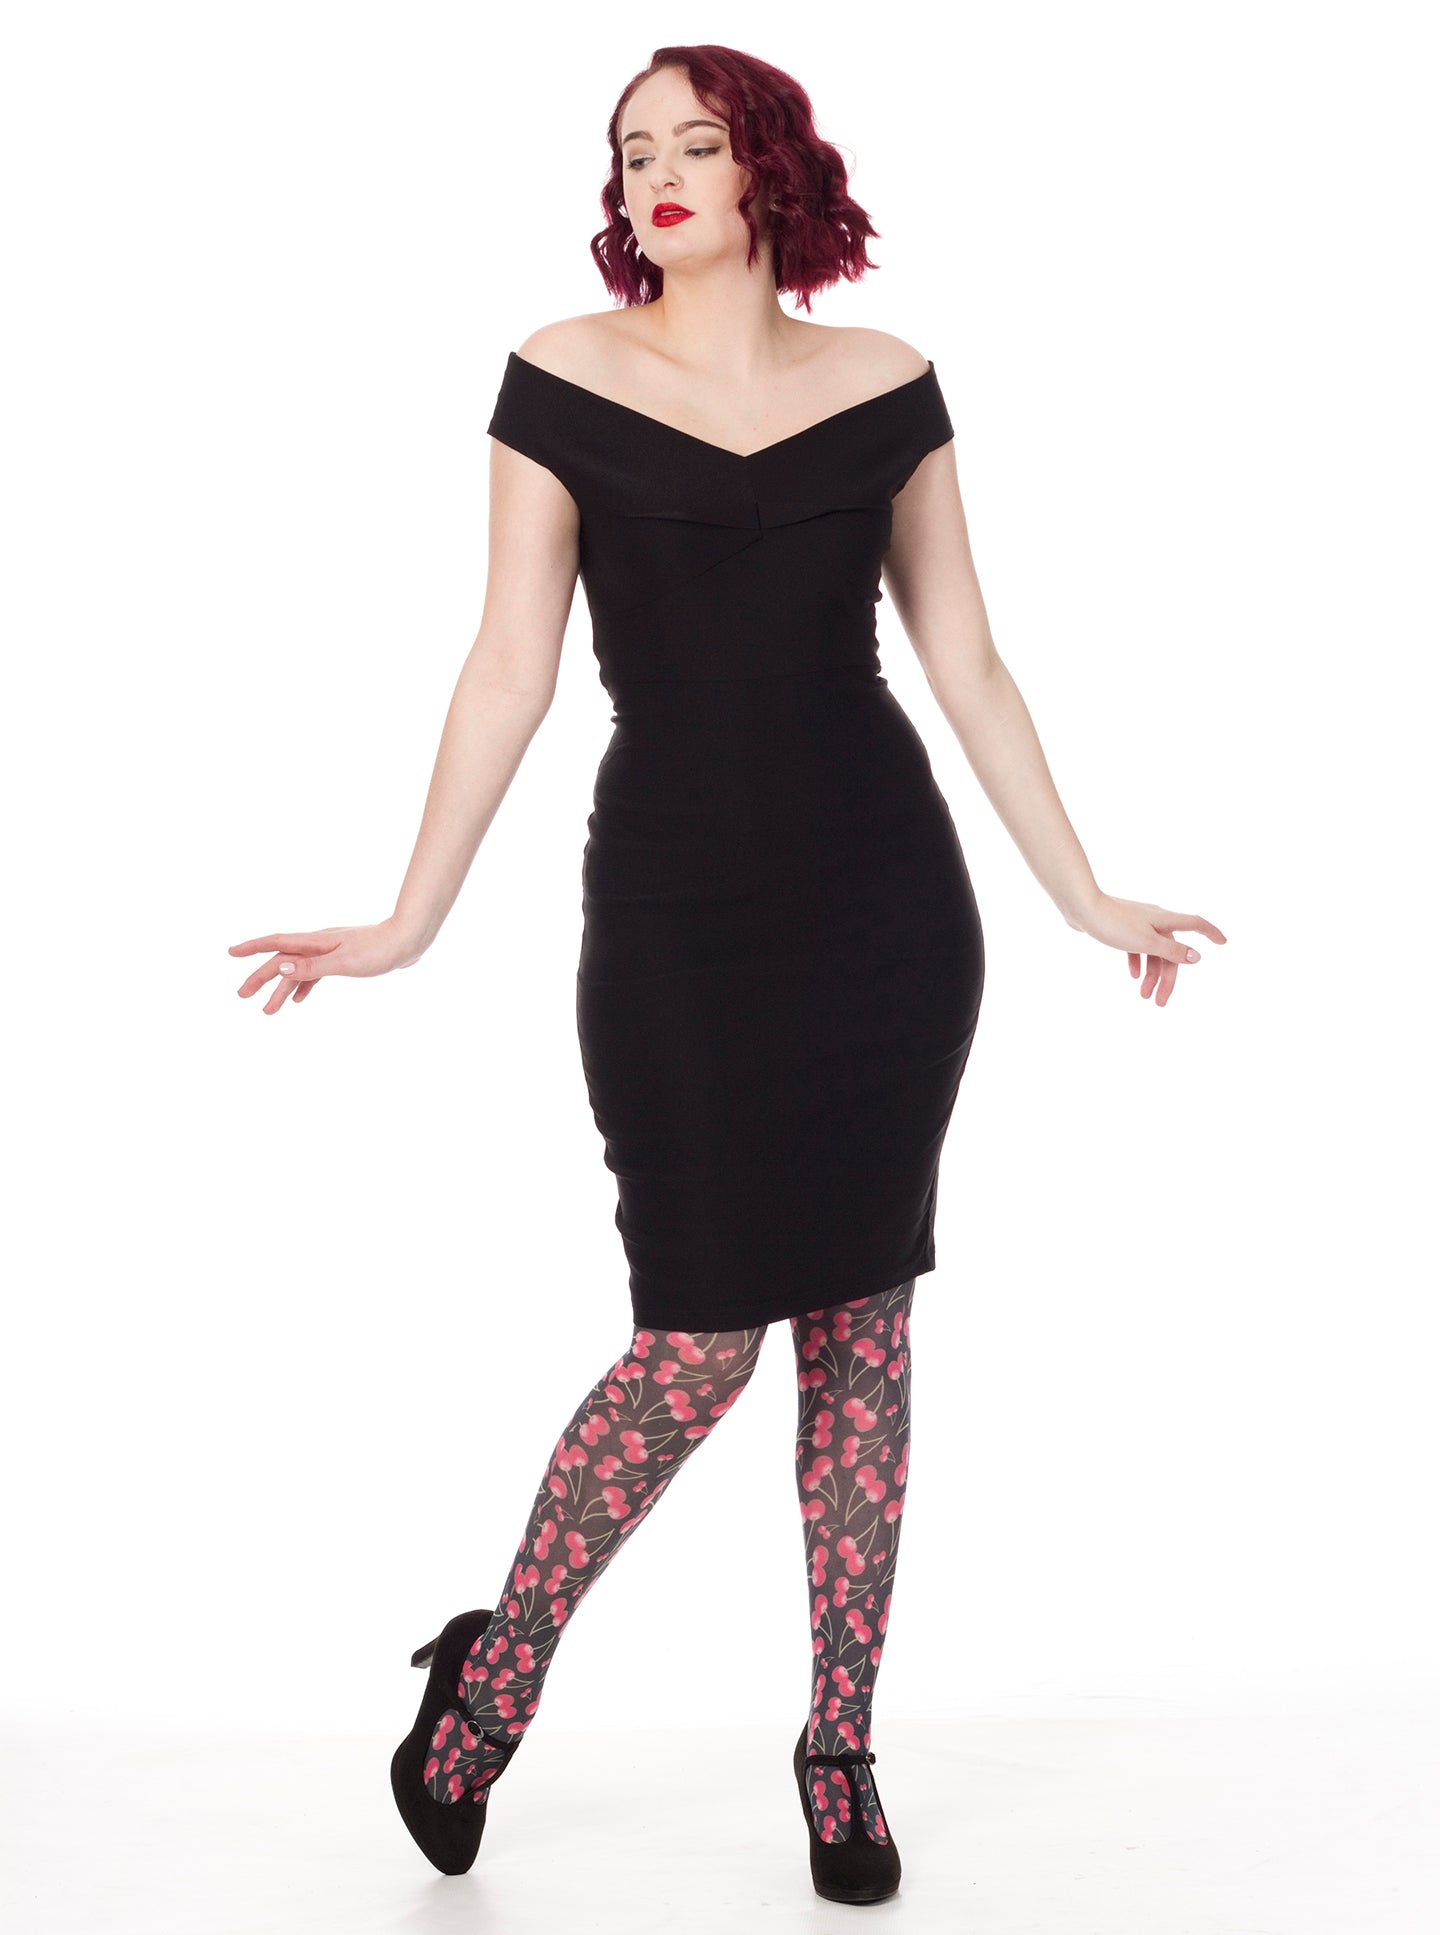 Butterfly Jewel Printed Tights, Wholesale Stockings